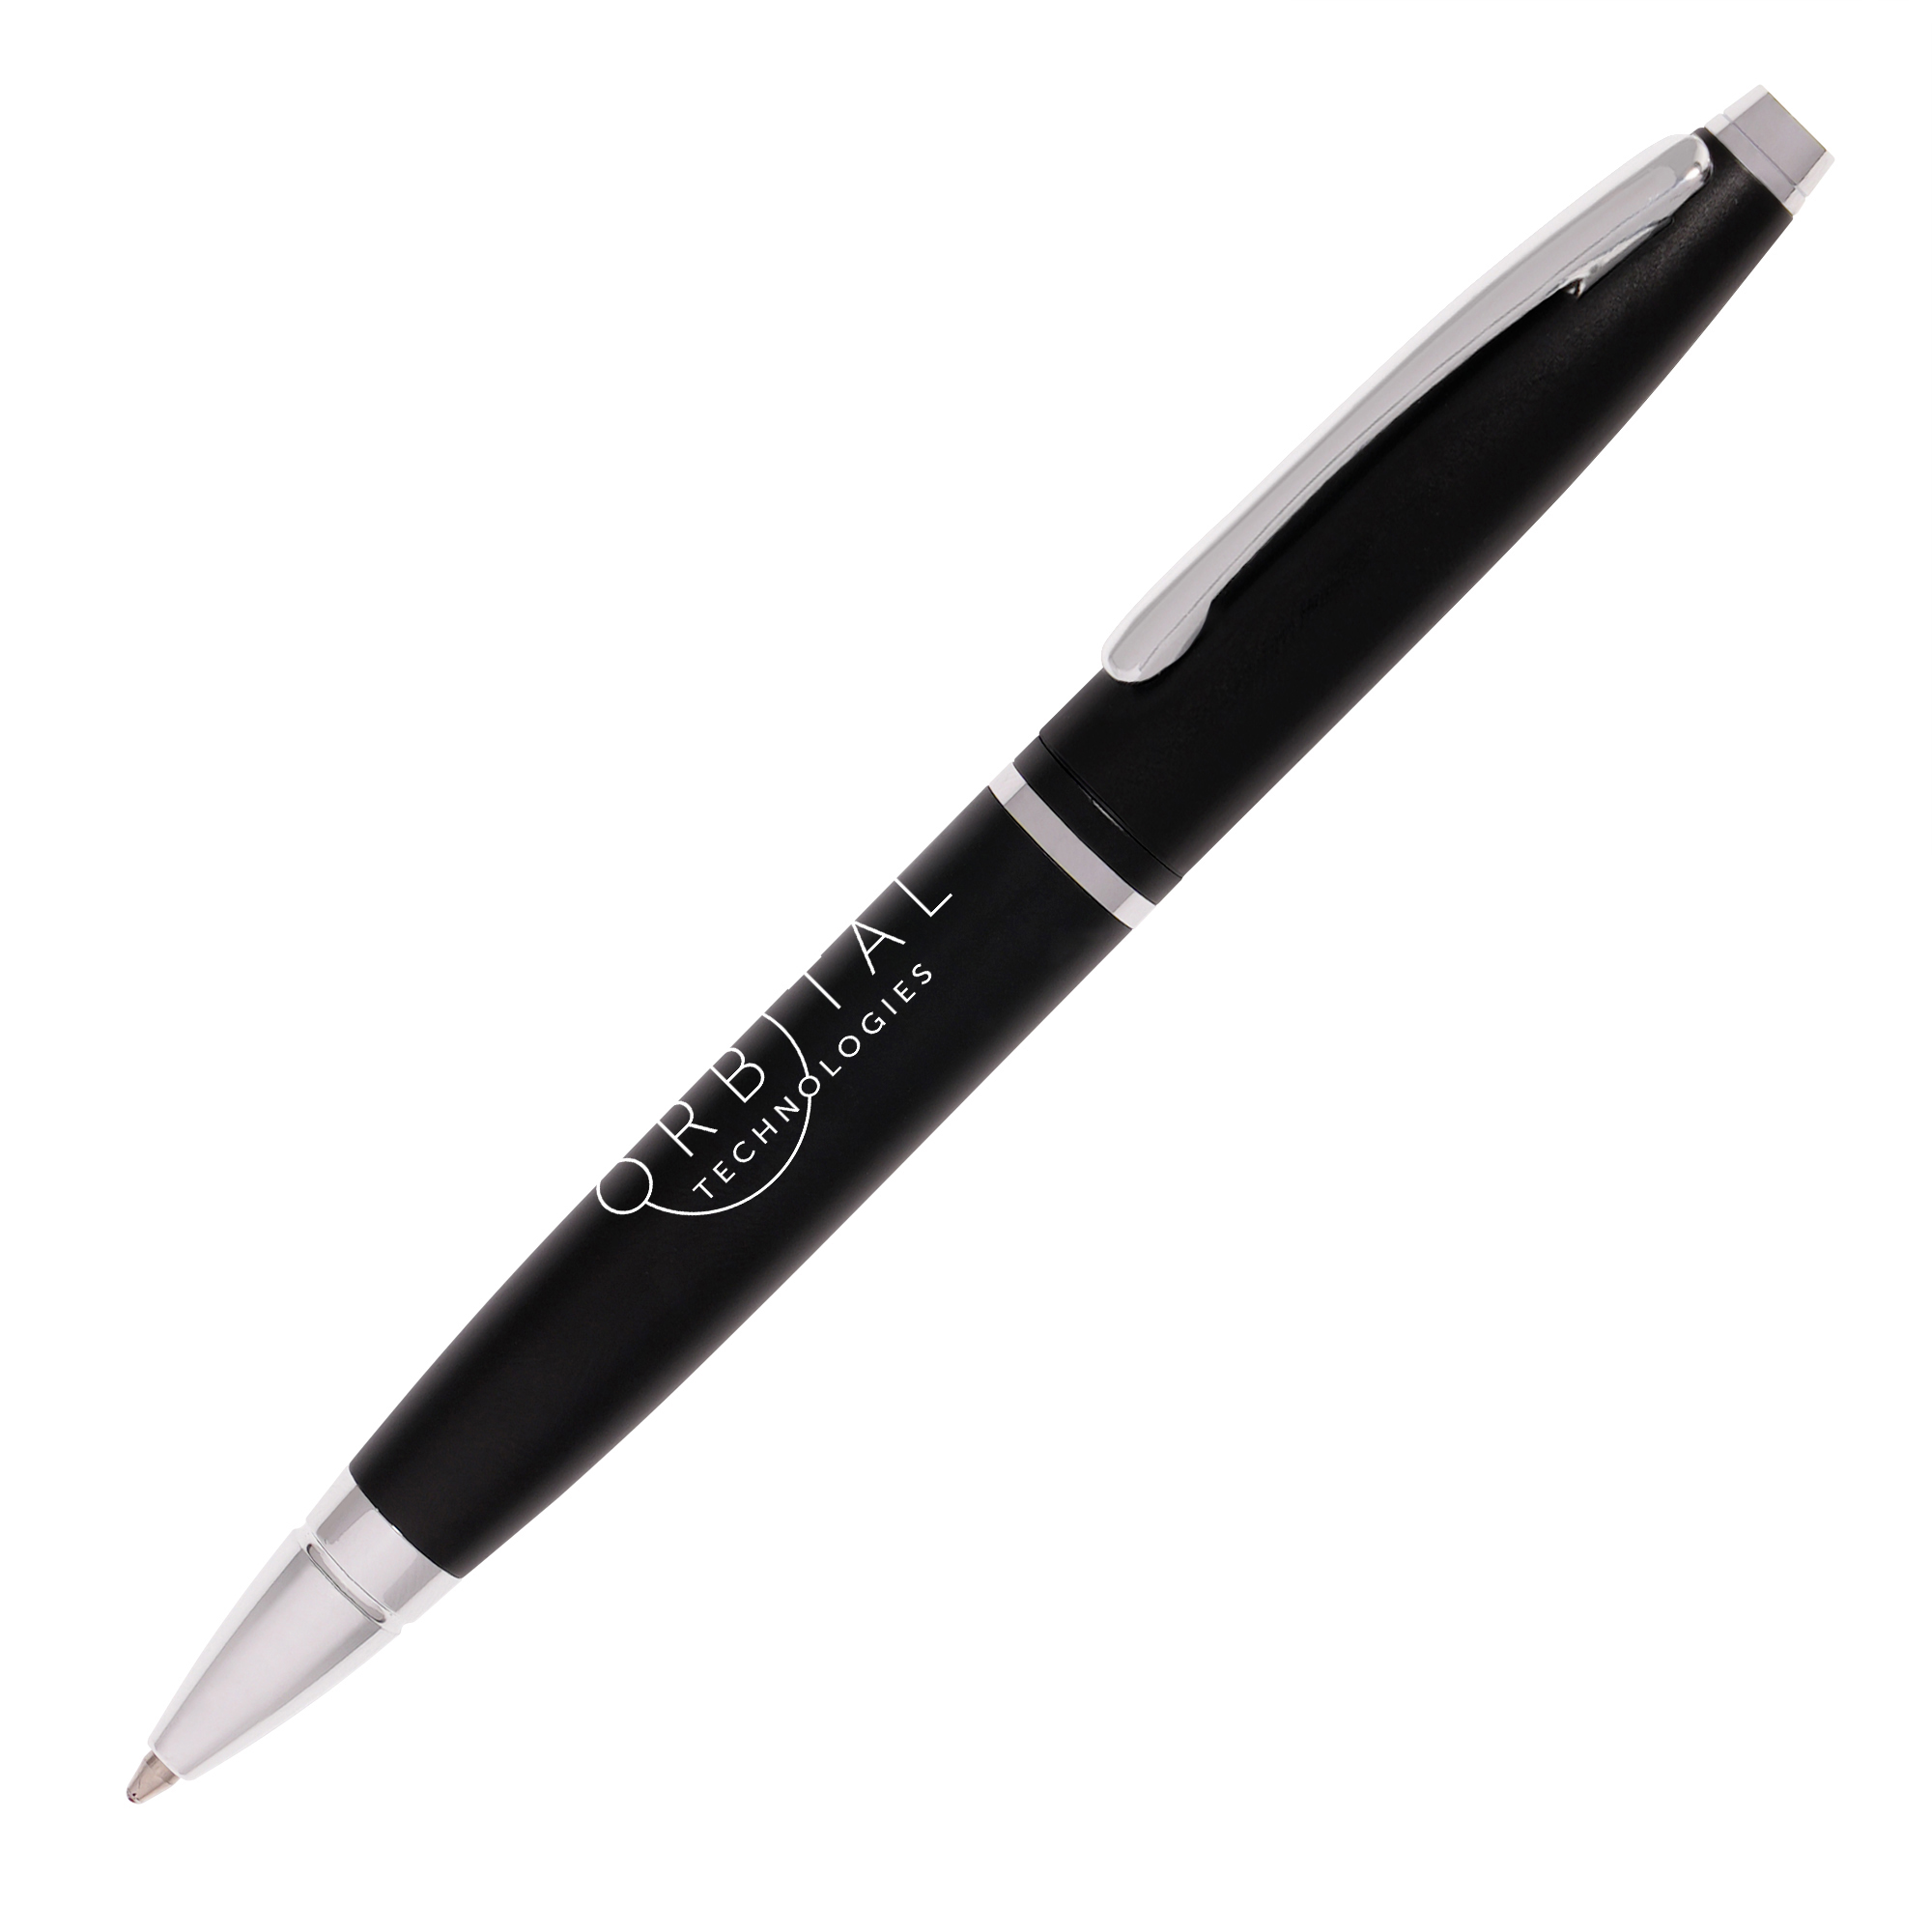 A contemporary metal twist action ball pen with a satin smooth finish available in three sumptuous colours: black, silver and gunmetal.